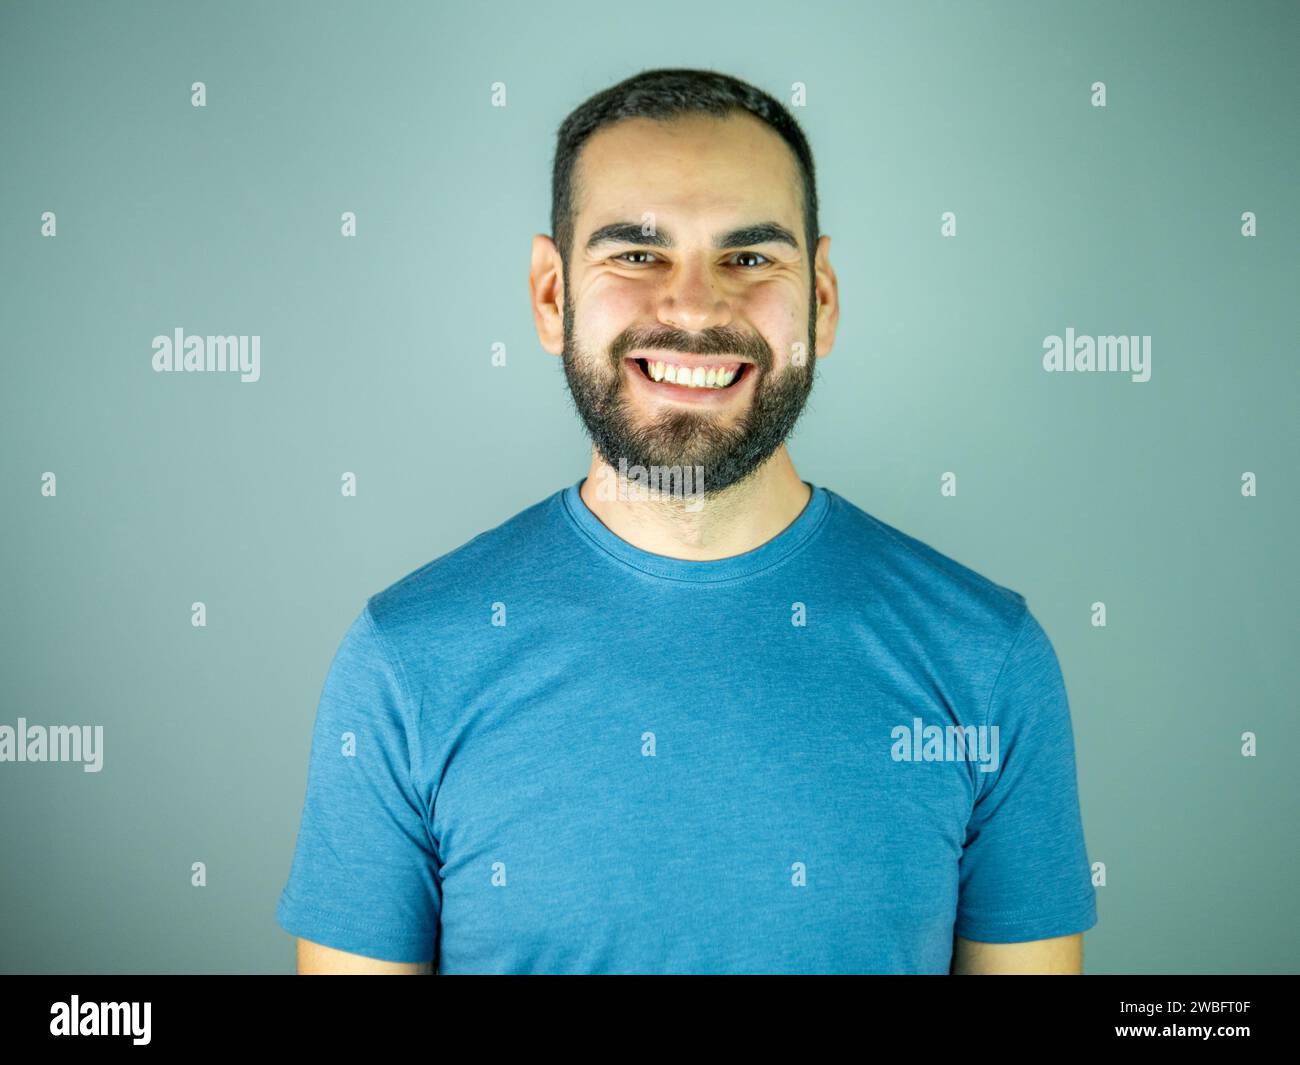 Young bearded man with a blue tshirt smiling and looking at camera in a gray brackground Stock Photo